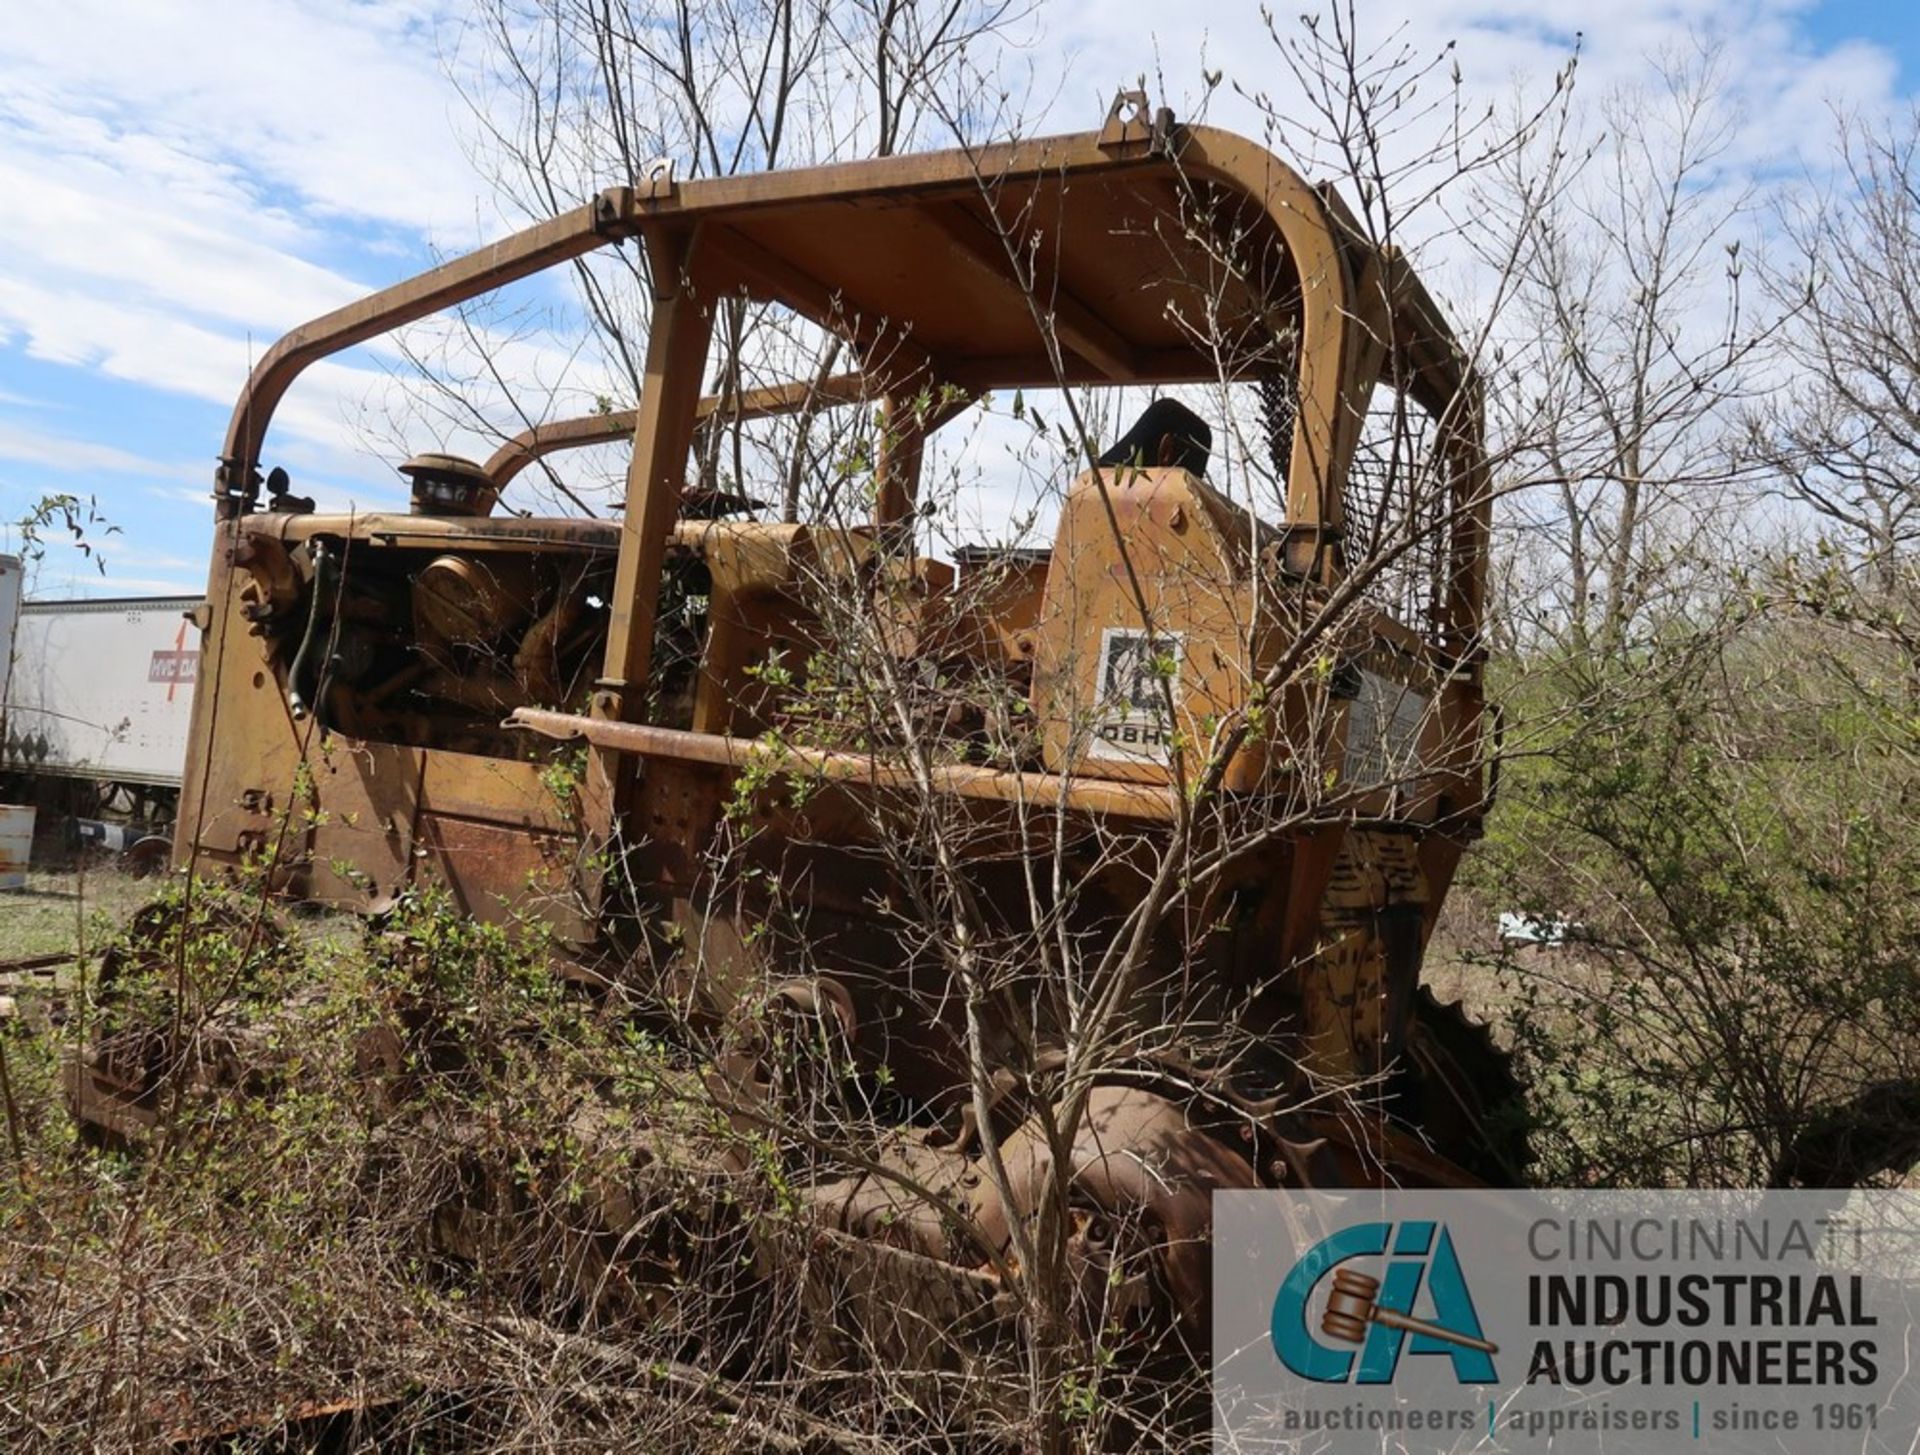 CATERPILLAR MODEL D8H PARTED-OUT CRAWLER DOZIER; S/N N/A, PARTS ONLY DOZIER **LOCATED AT 900 LICKING - Image 4 of 5